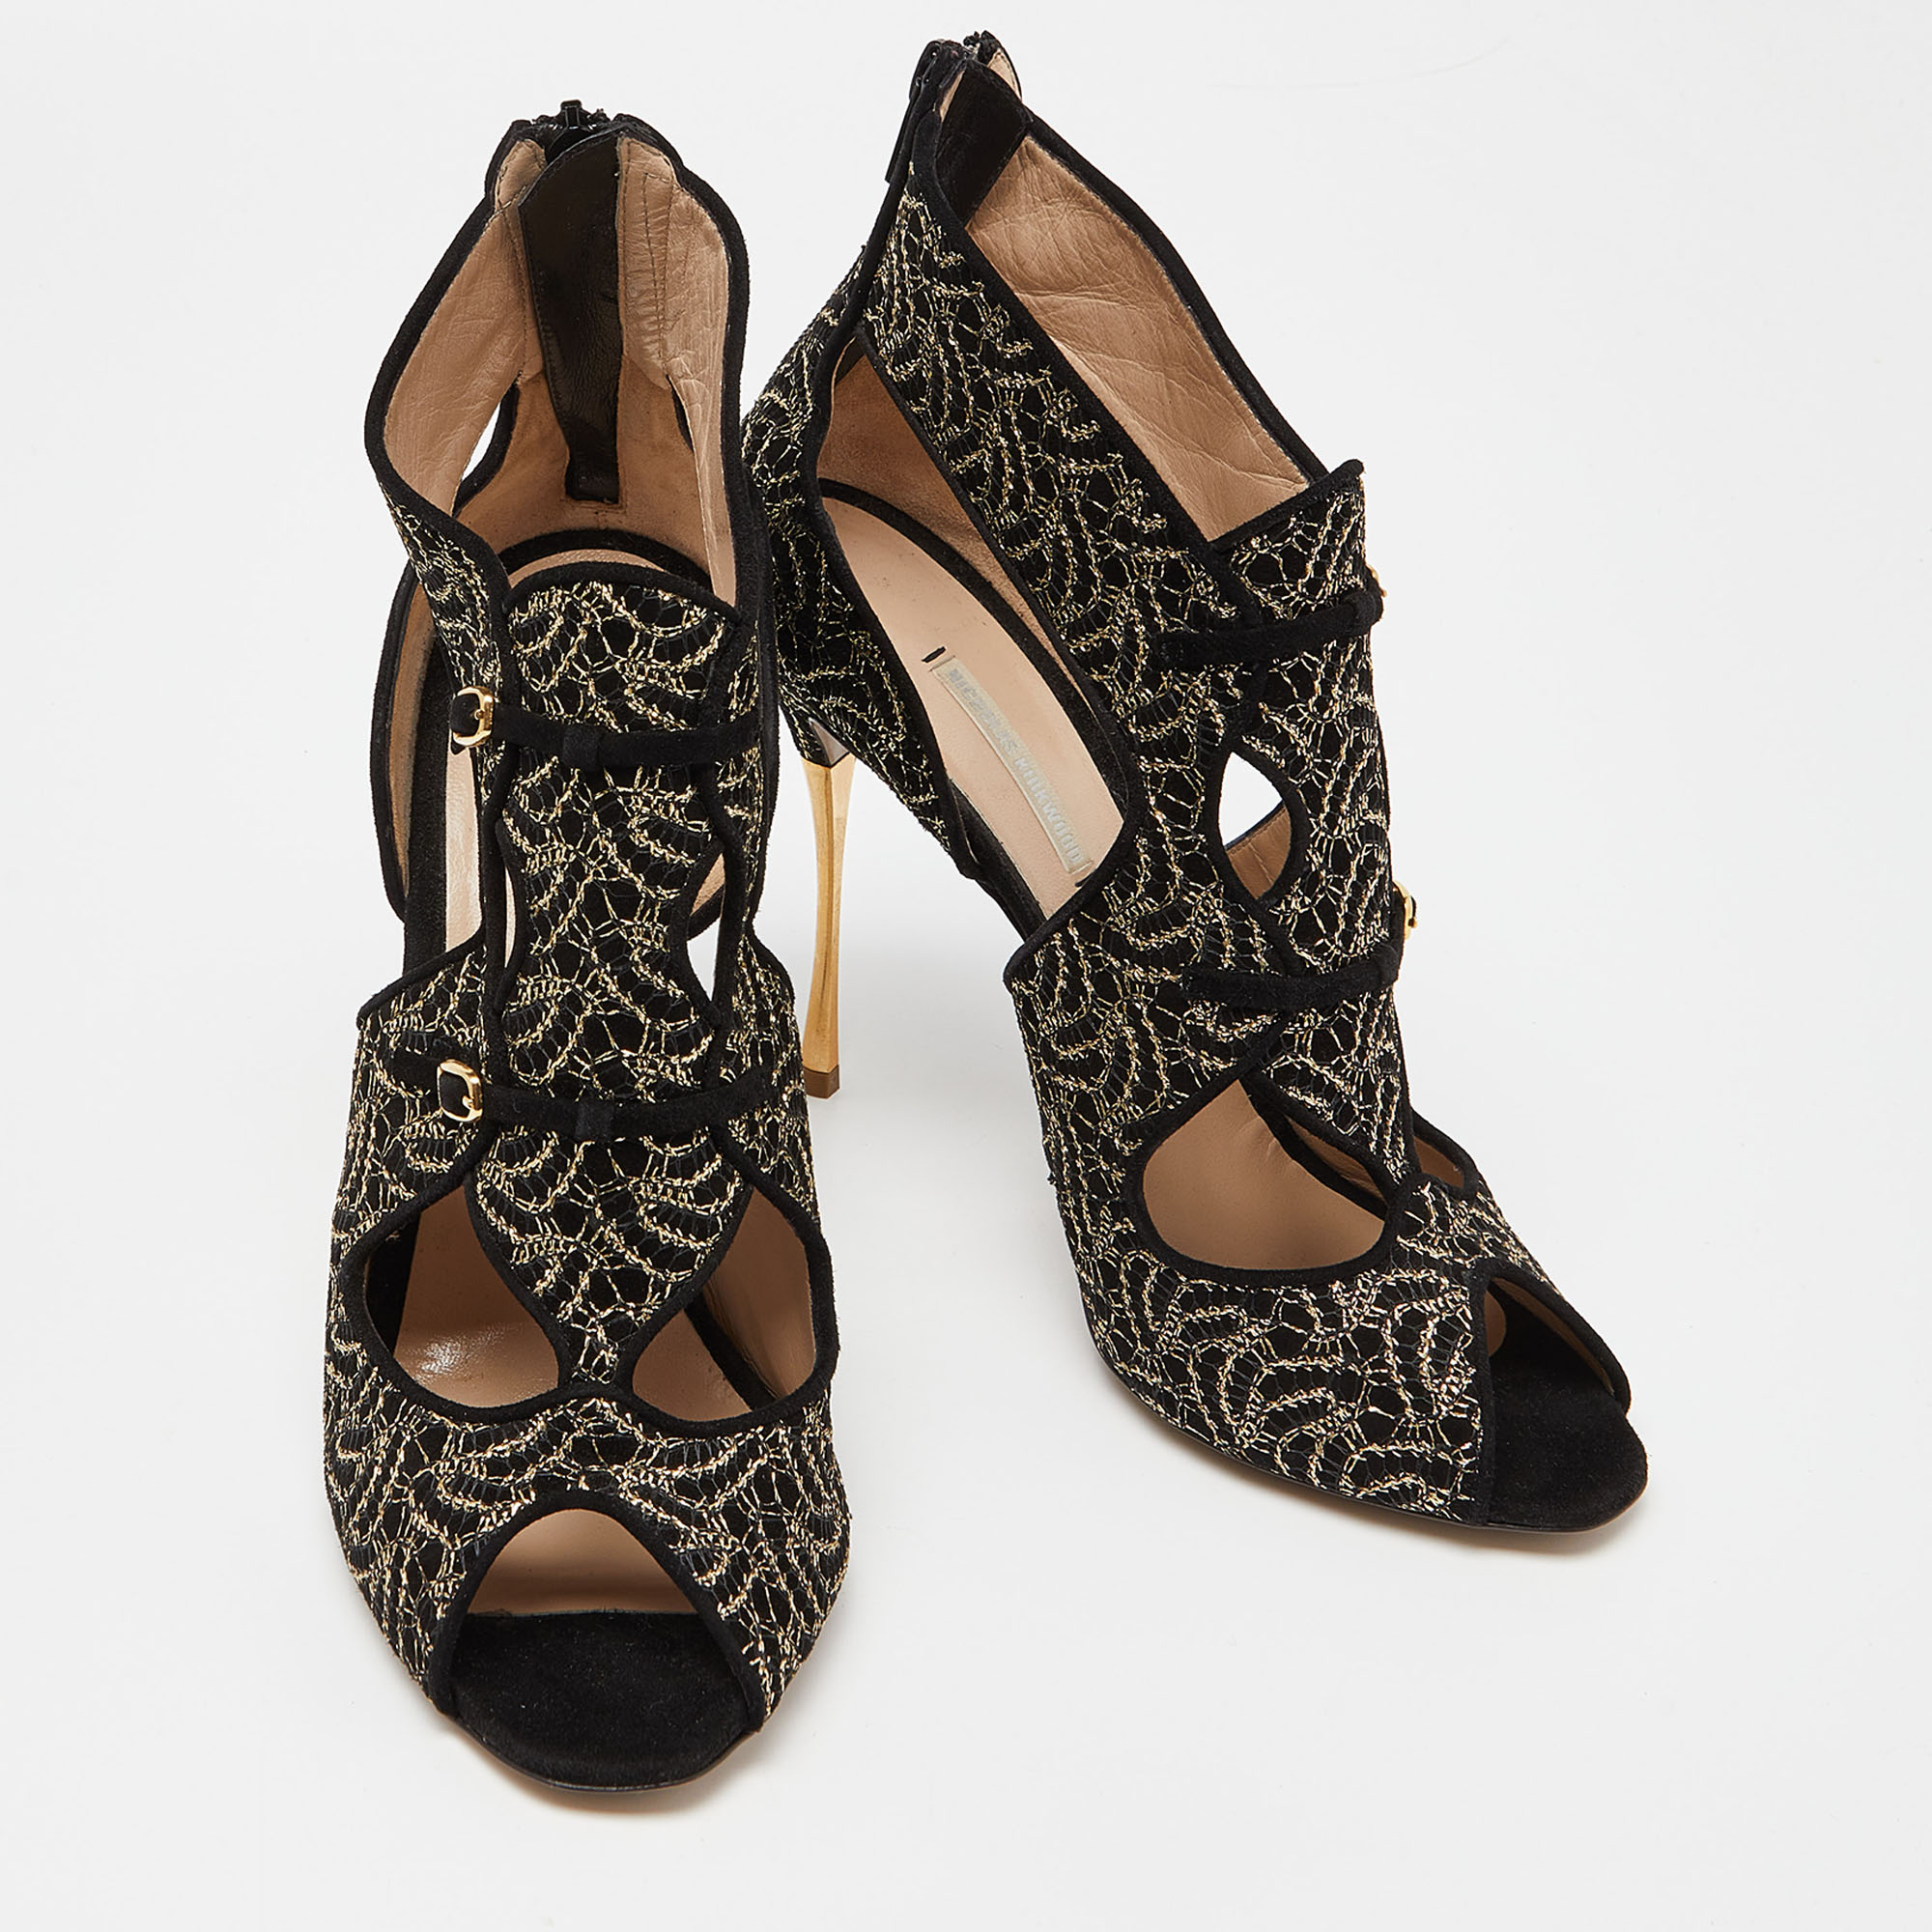 Nicholas Kirkwood Black/Gold Embroidered Suede Cut Out Sandals Size 41